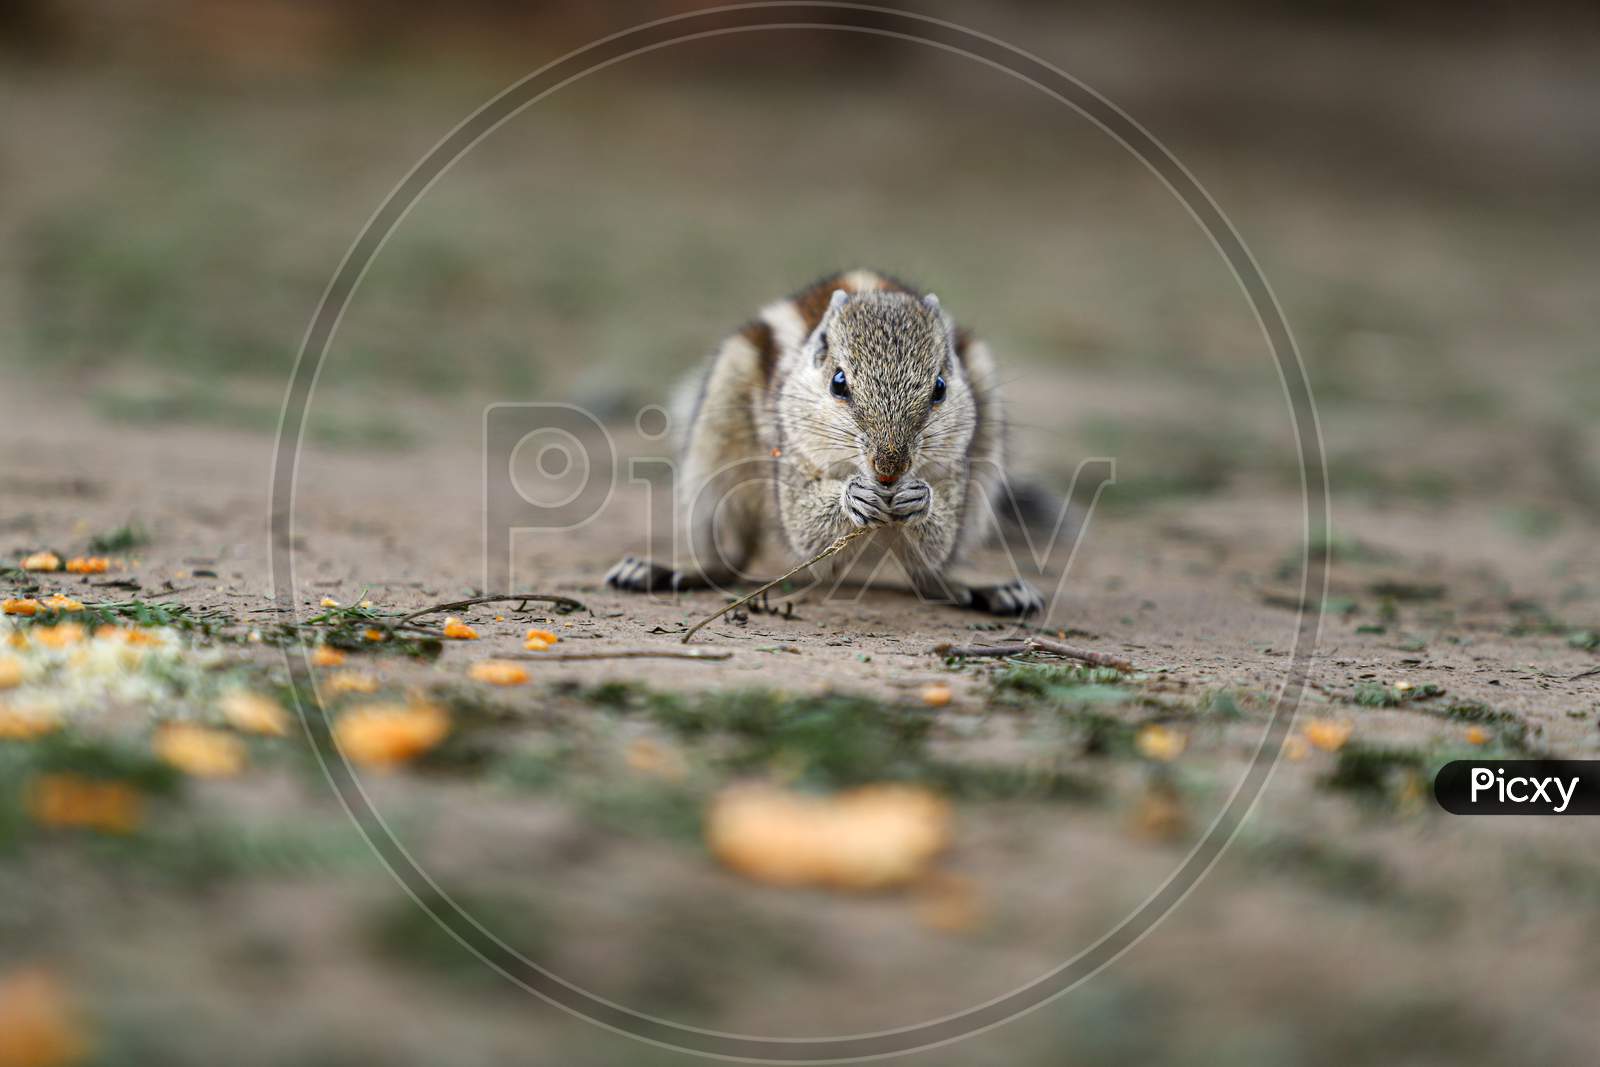 Indian palm squirrel or three-striped palm squirrel eating chips